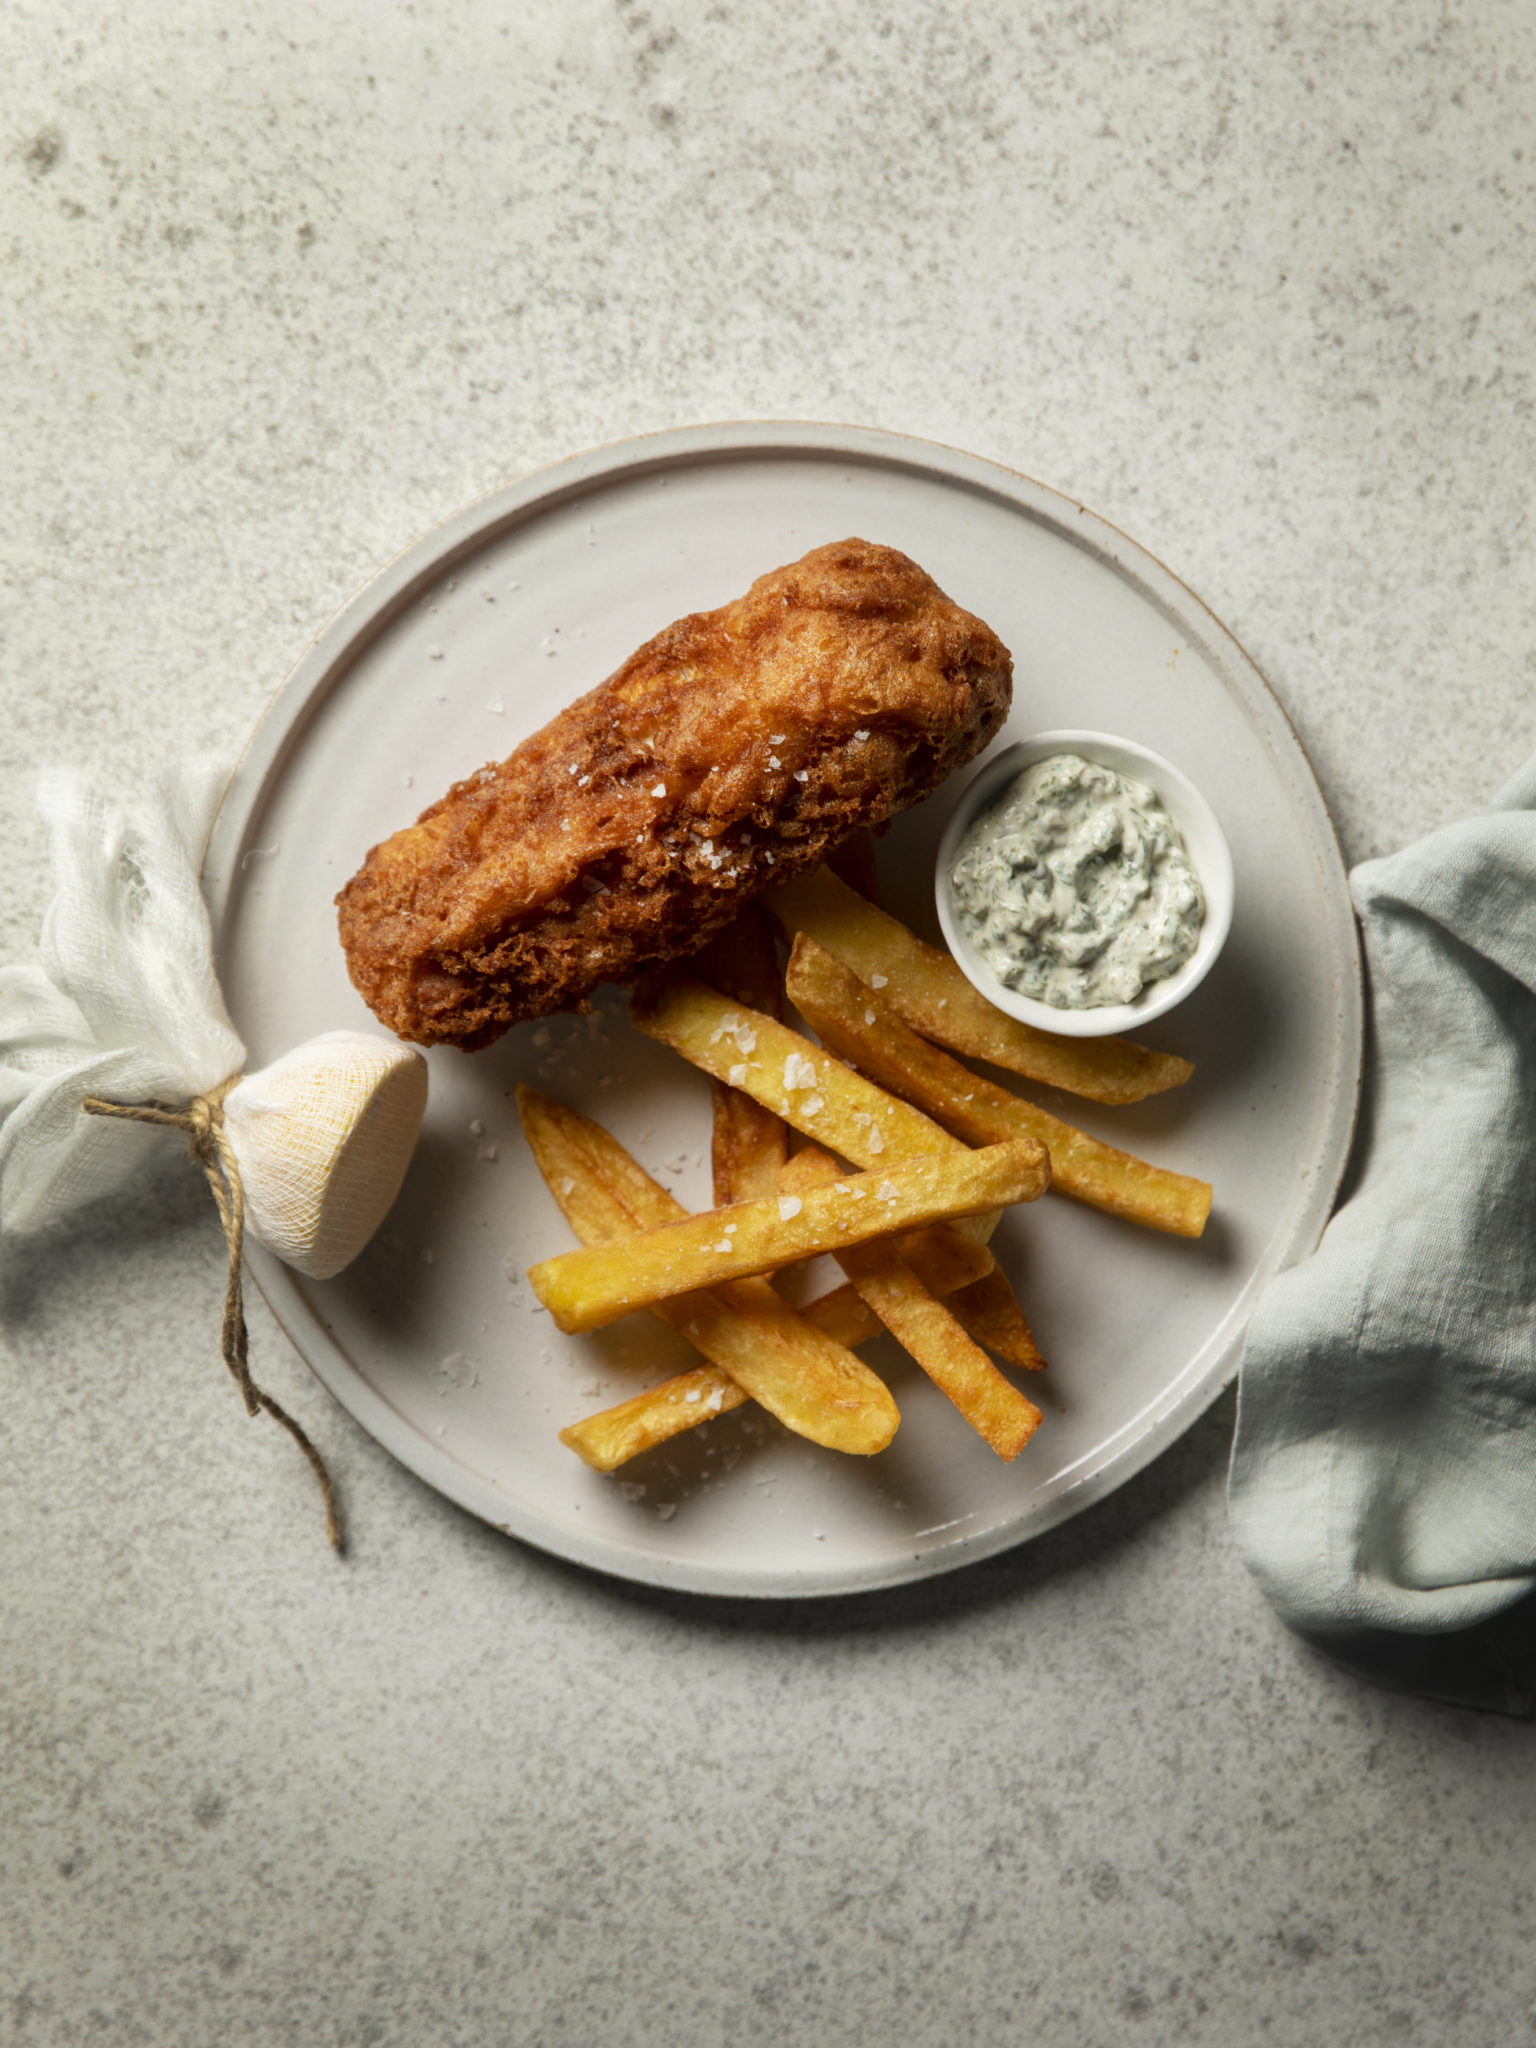 Heston Blumenthal’s fish and chips